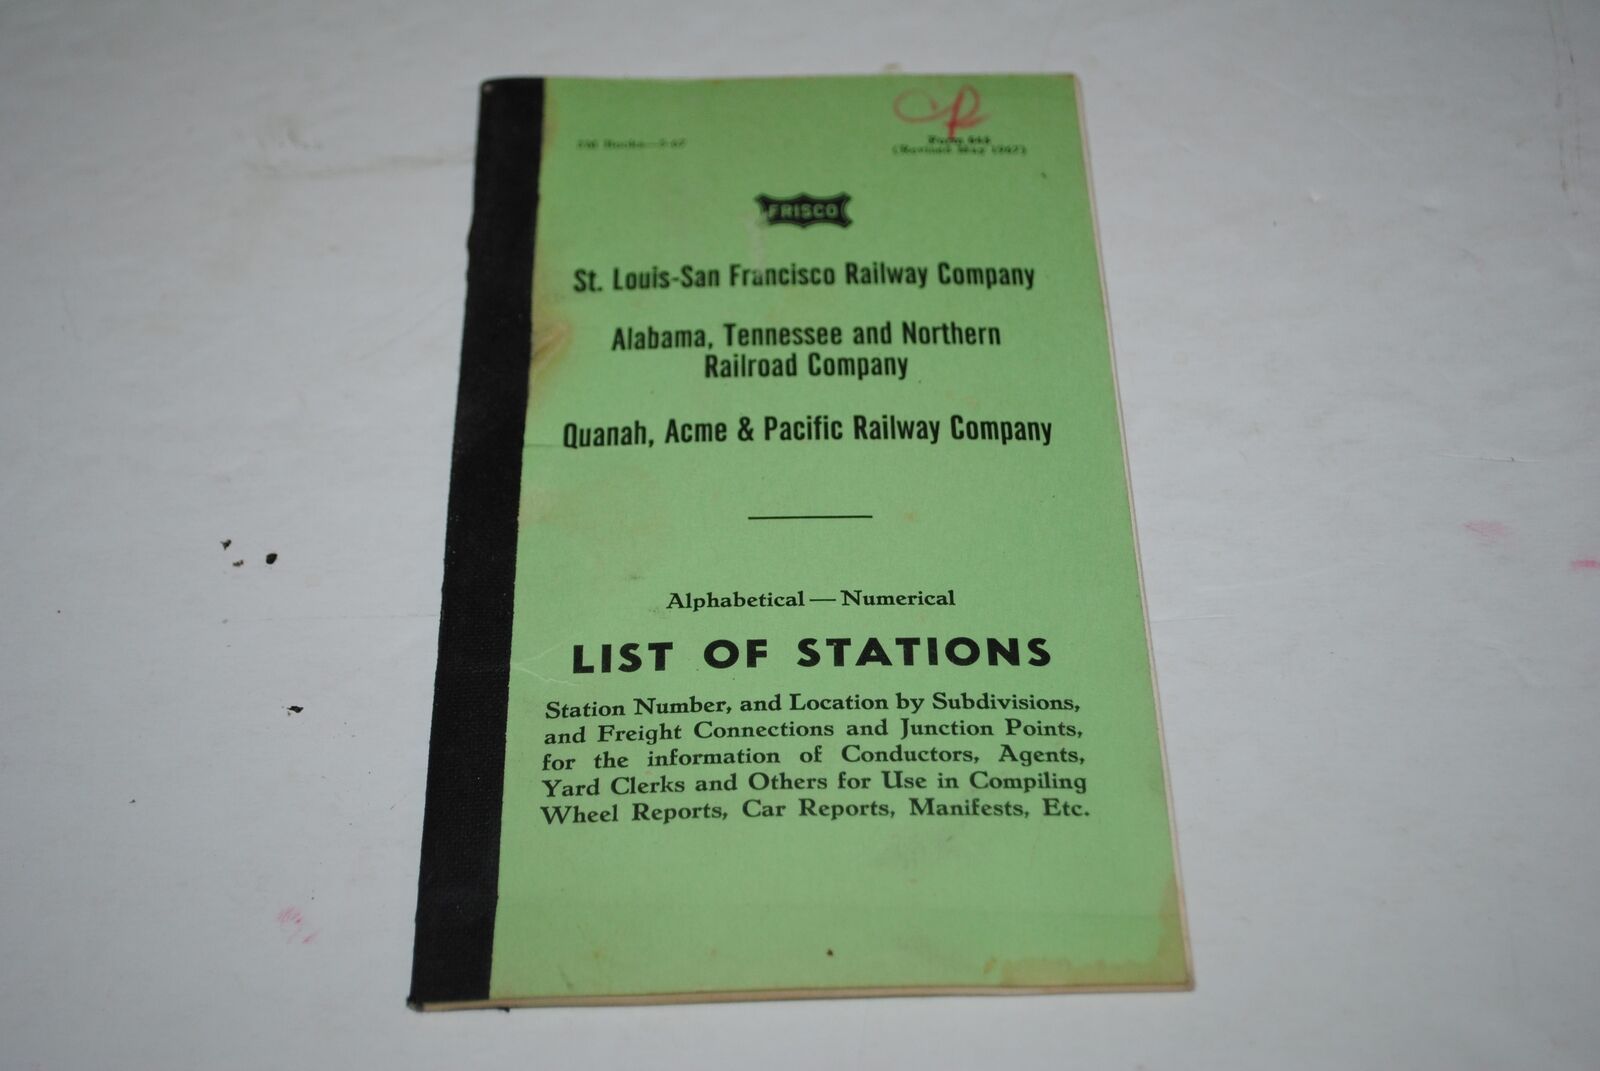 1967 Frisco; Alabama Tennessee & Northern, Quanah Acme &Pacific List of Stations